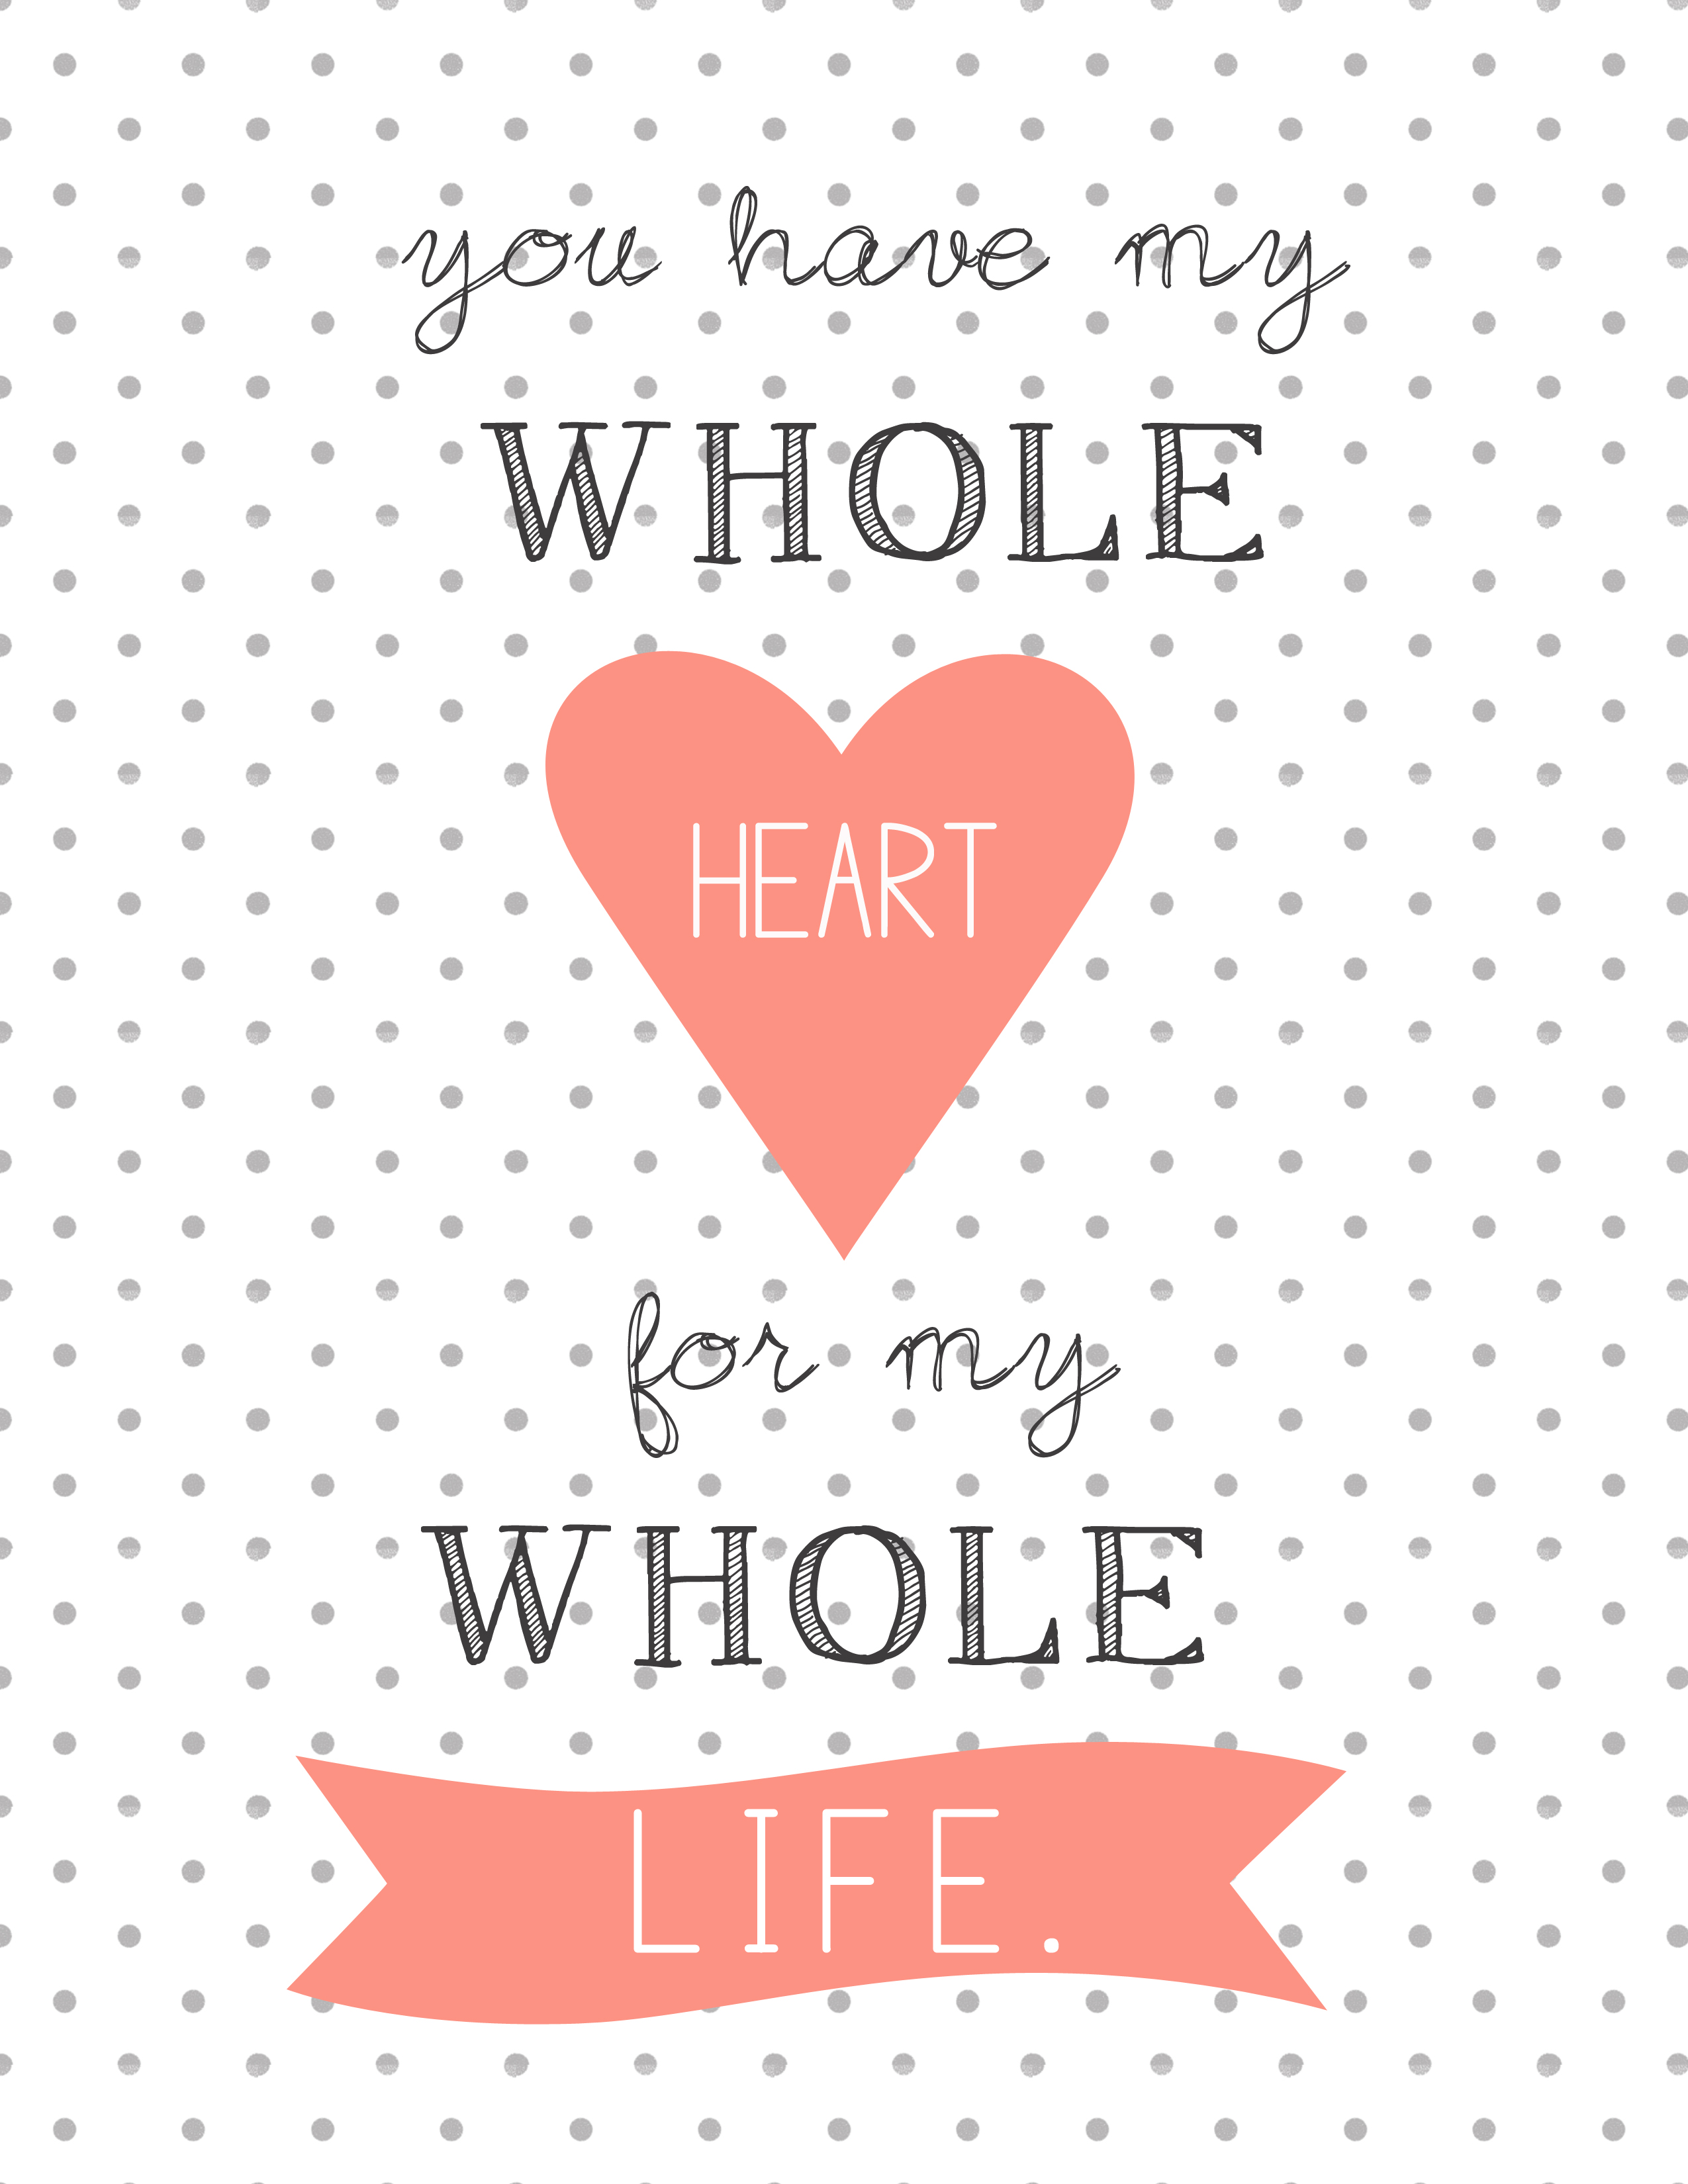 free printable valentine- "You have my whole heart for my whole life."